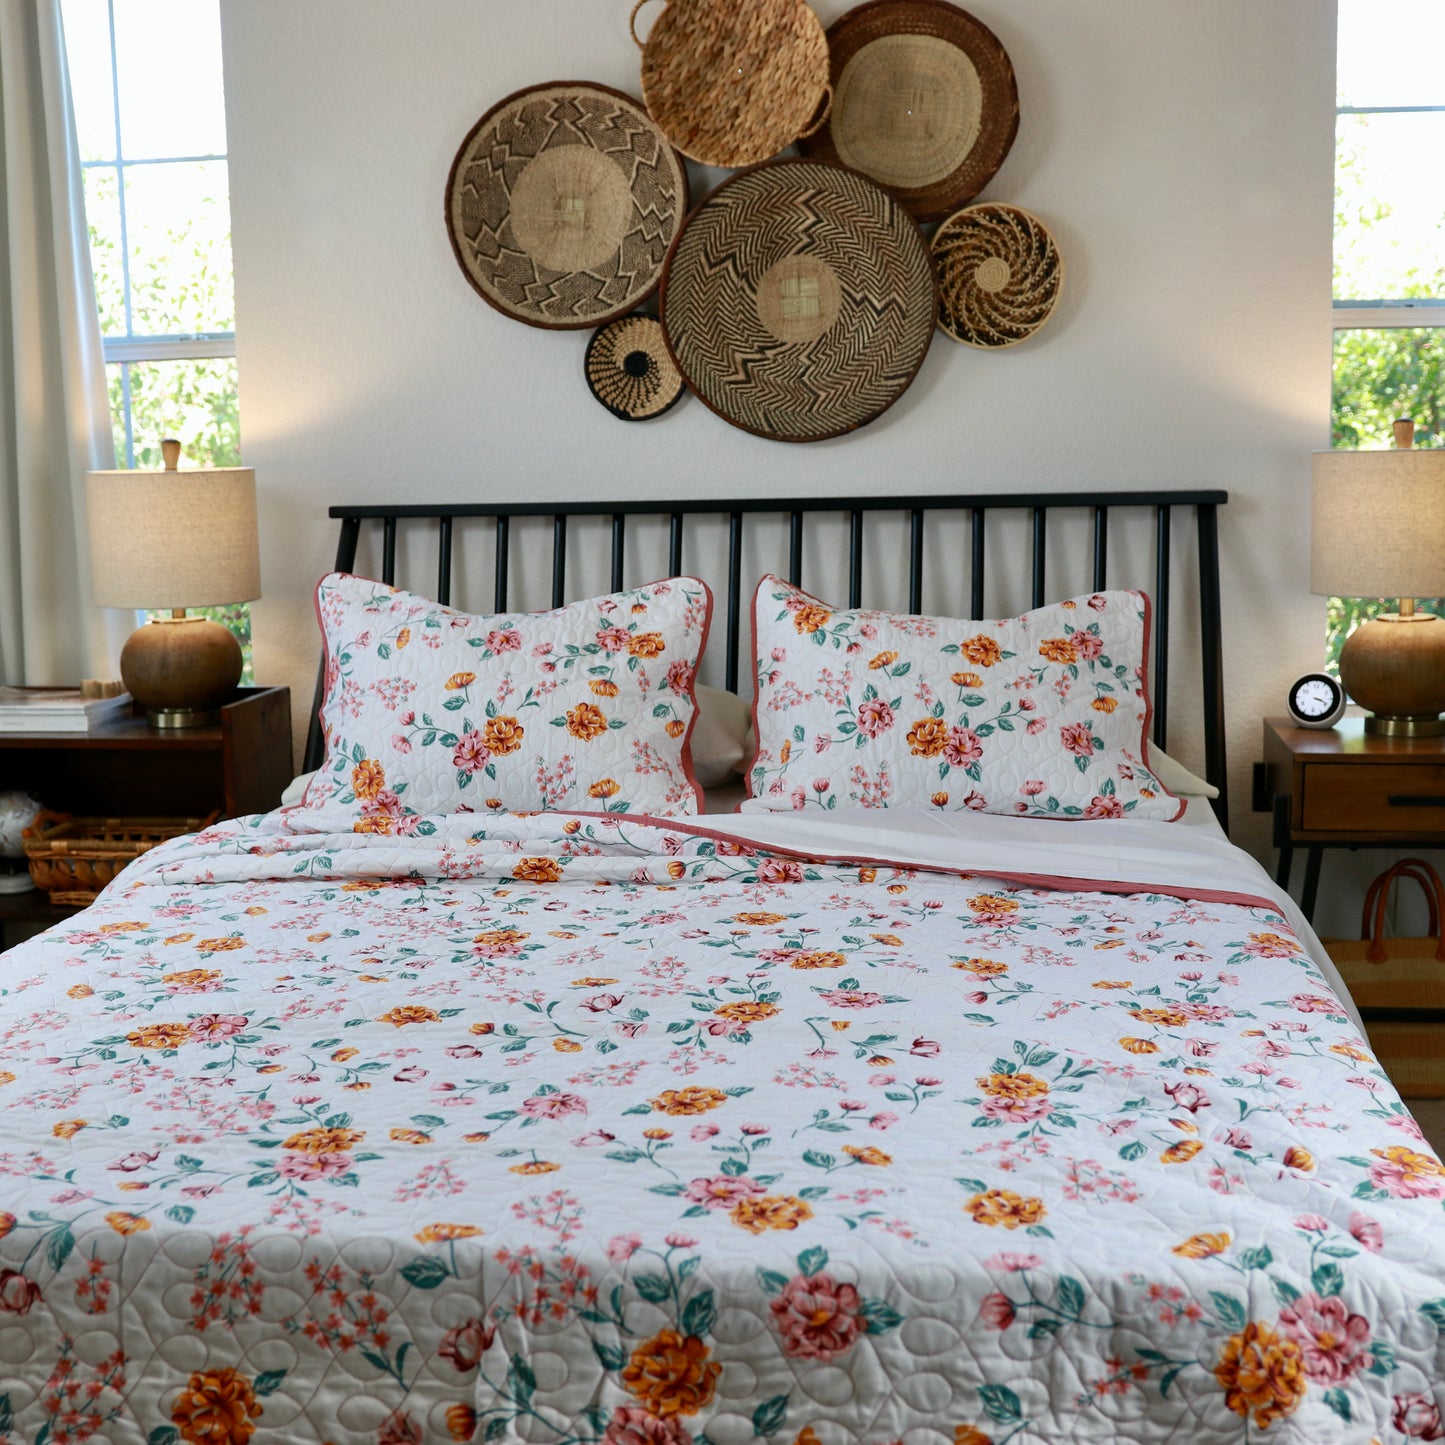 Queen Size 3 Piece double sided floral and salmon 100% Cotton Floral Quilt & Sham Set